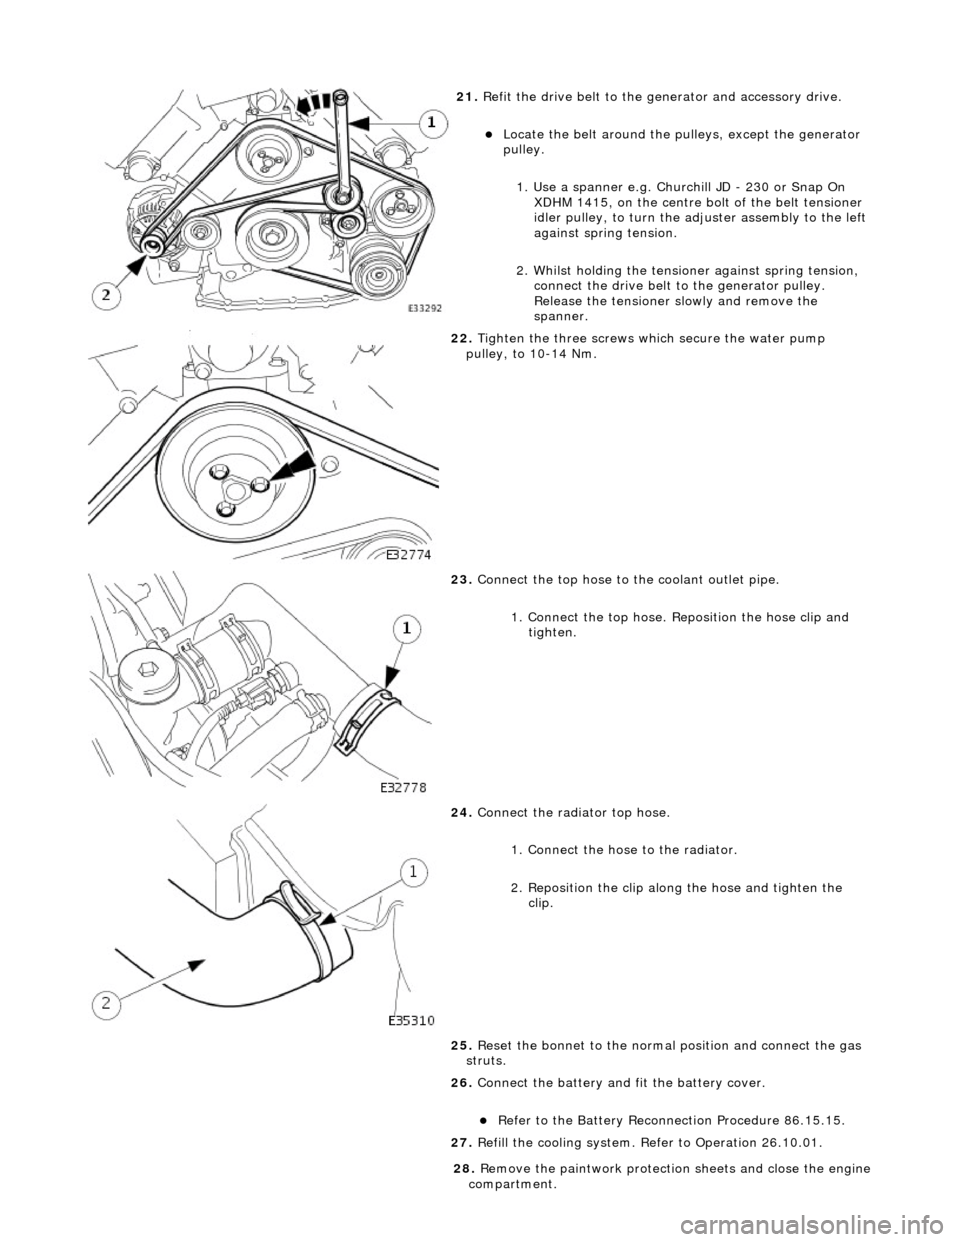 JAGUAR X308 1998 2.G Workshop Manual  
21
. 
Refit the drive belt to the generator and accessory drive. 
Locat
 e the belt around the pulleys, except the generator 
pulley.  
1. Use a spanner e.g. Churchill JD - 230 or Snap On  XDHM 1